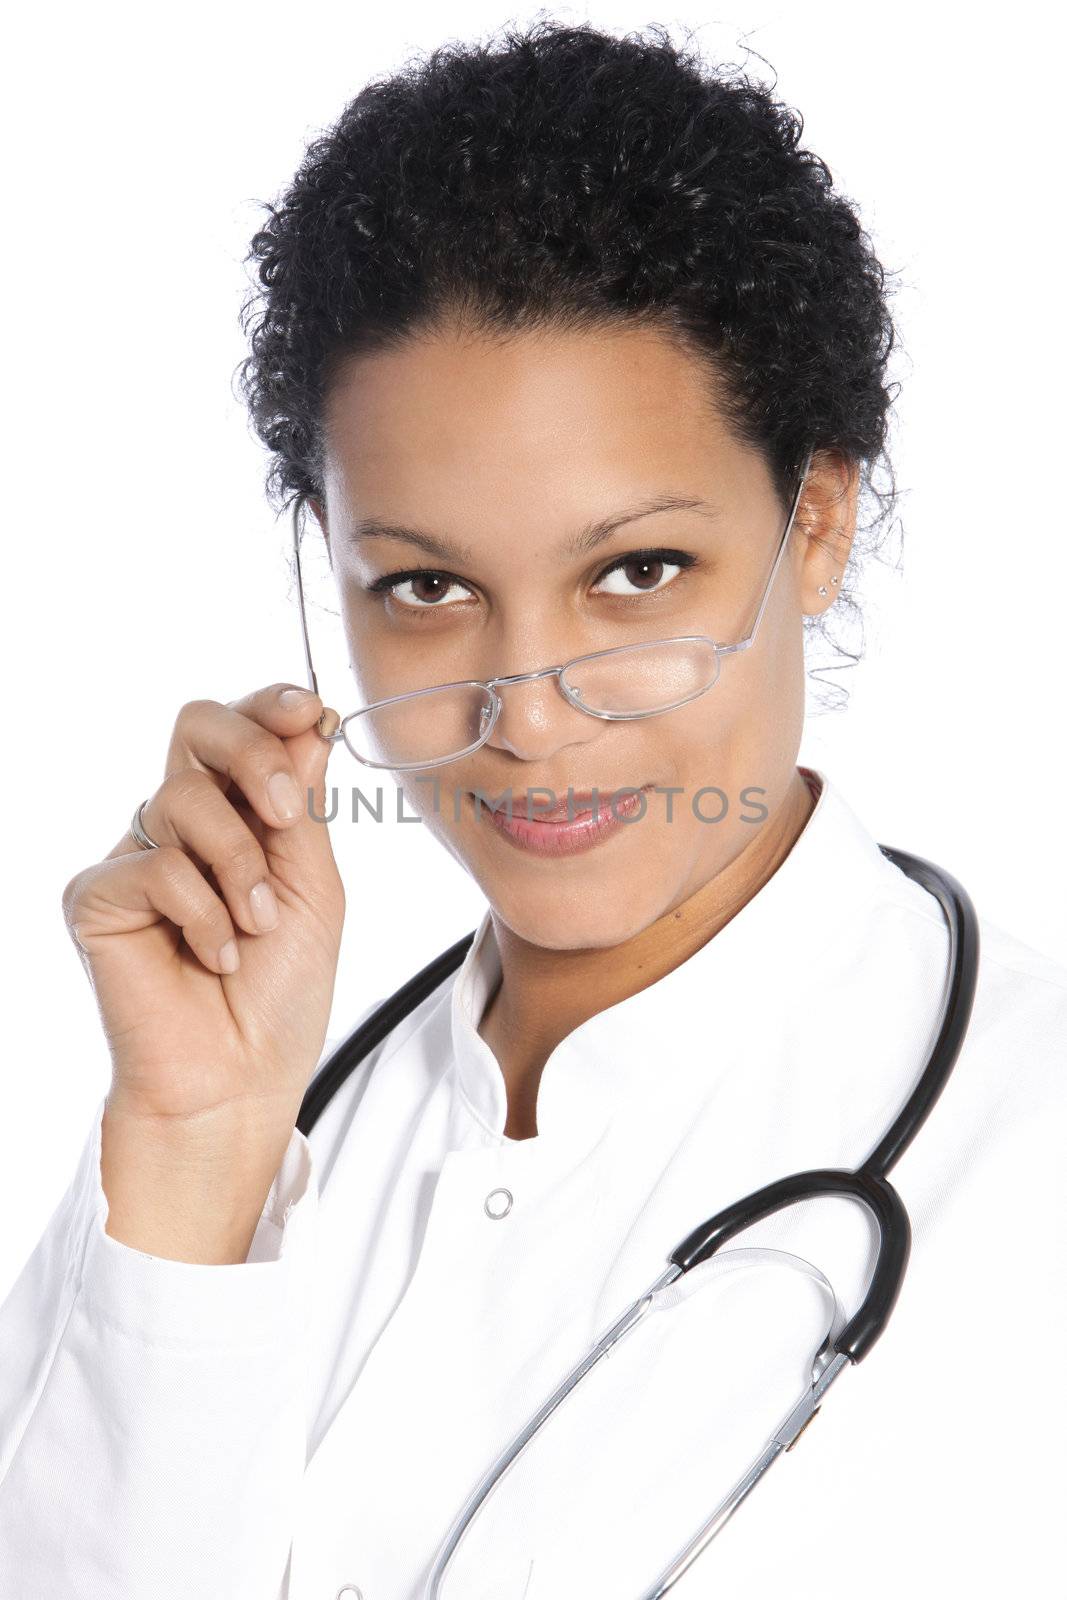 Studio portrait on white of the head and shoulders of a beautiful African American woman doctor